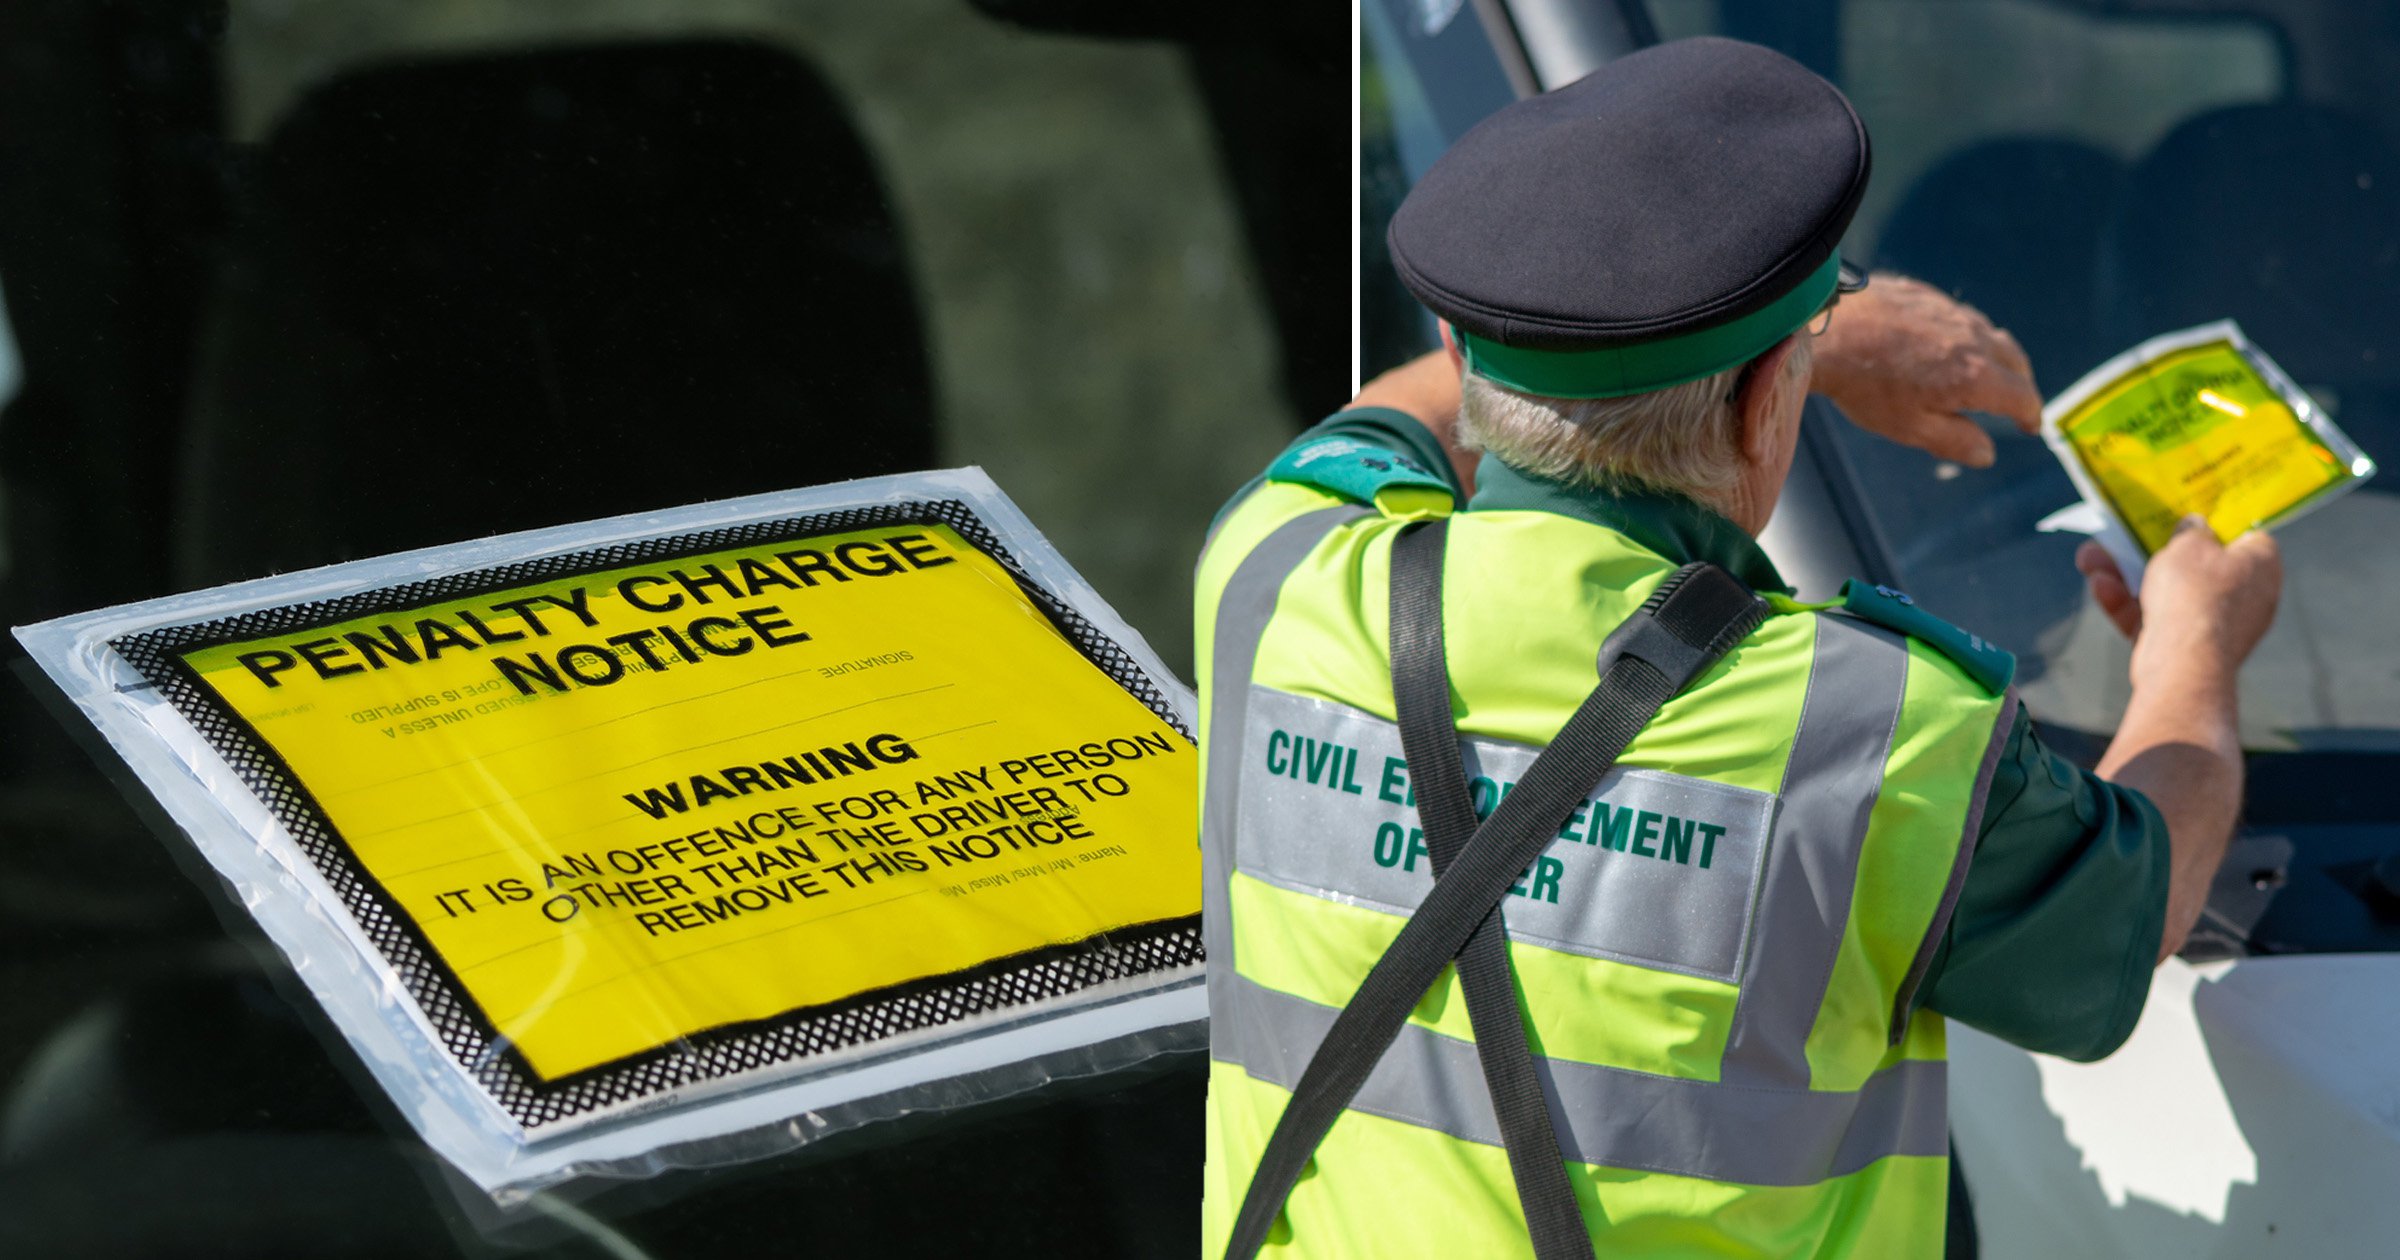 Drivers handed record 8,600,000 parking tickets by private firms over 12 months